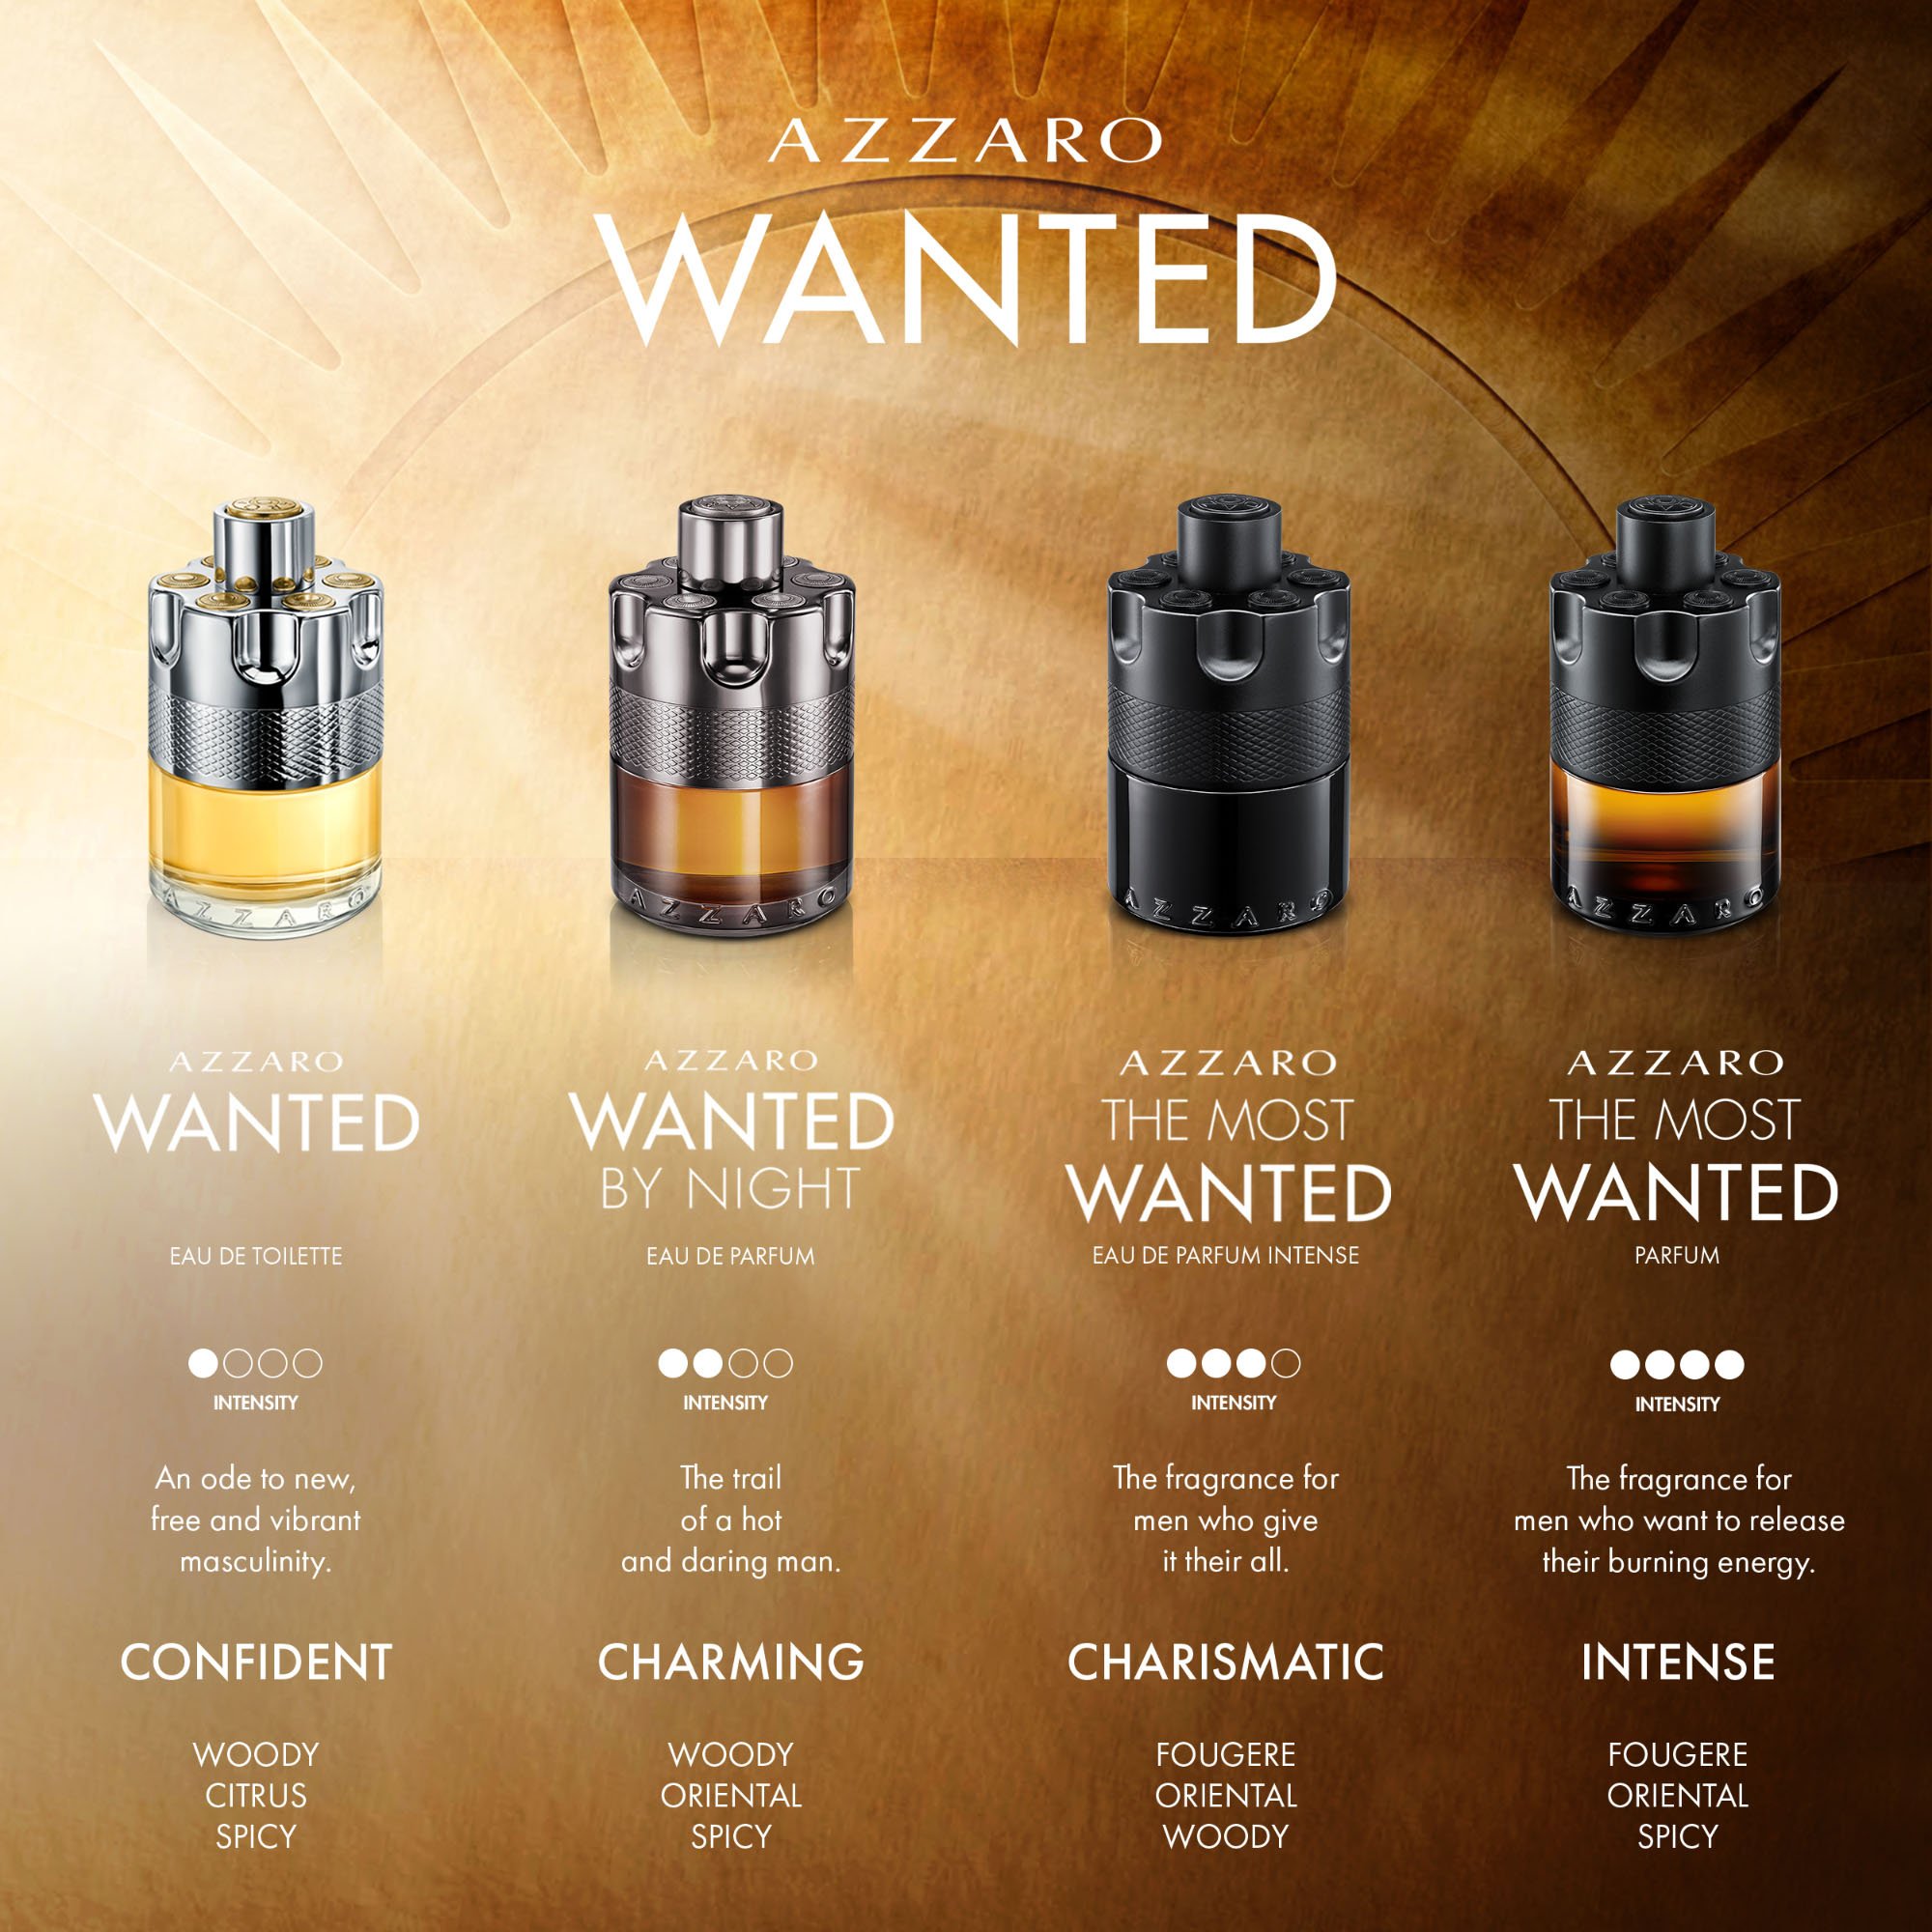 Духи want отзывы. Azzaro wanted Eau de Toilette 100ml. Azzaro wanted, EDT., 100 ml. Azzaro wanted by Night туалетная вода 100 мл. Azzaro most wanted духи мужские.